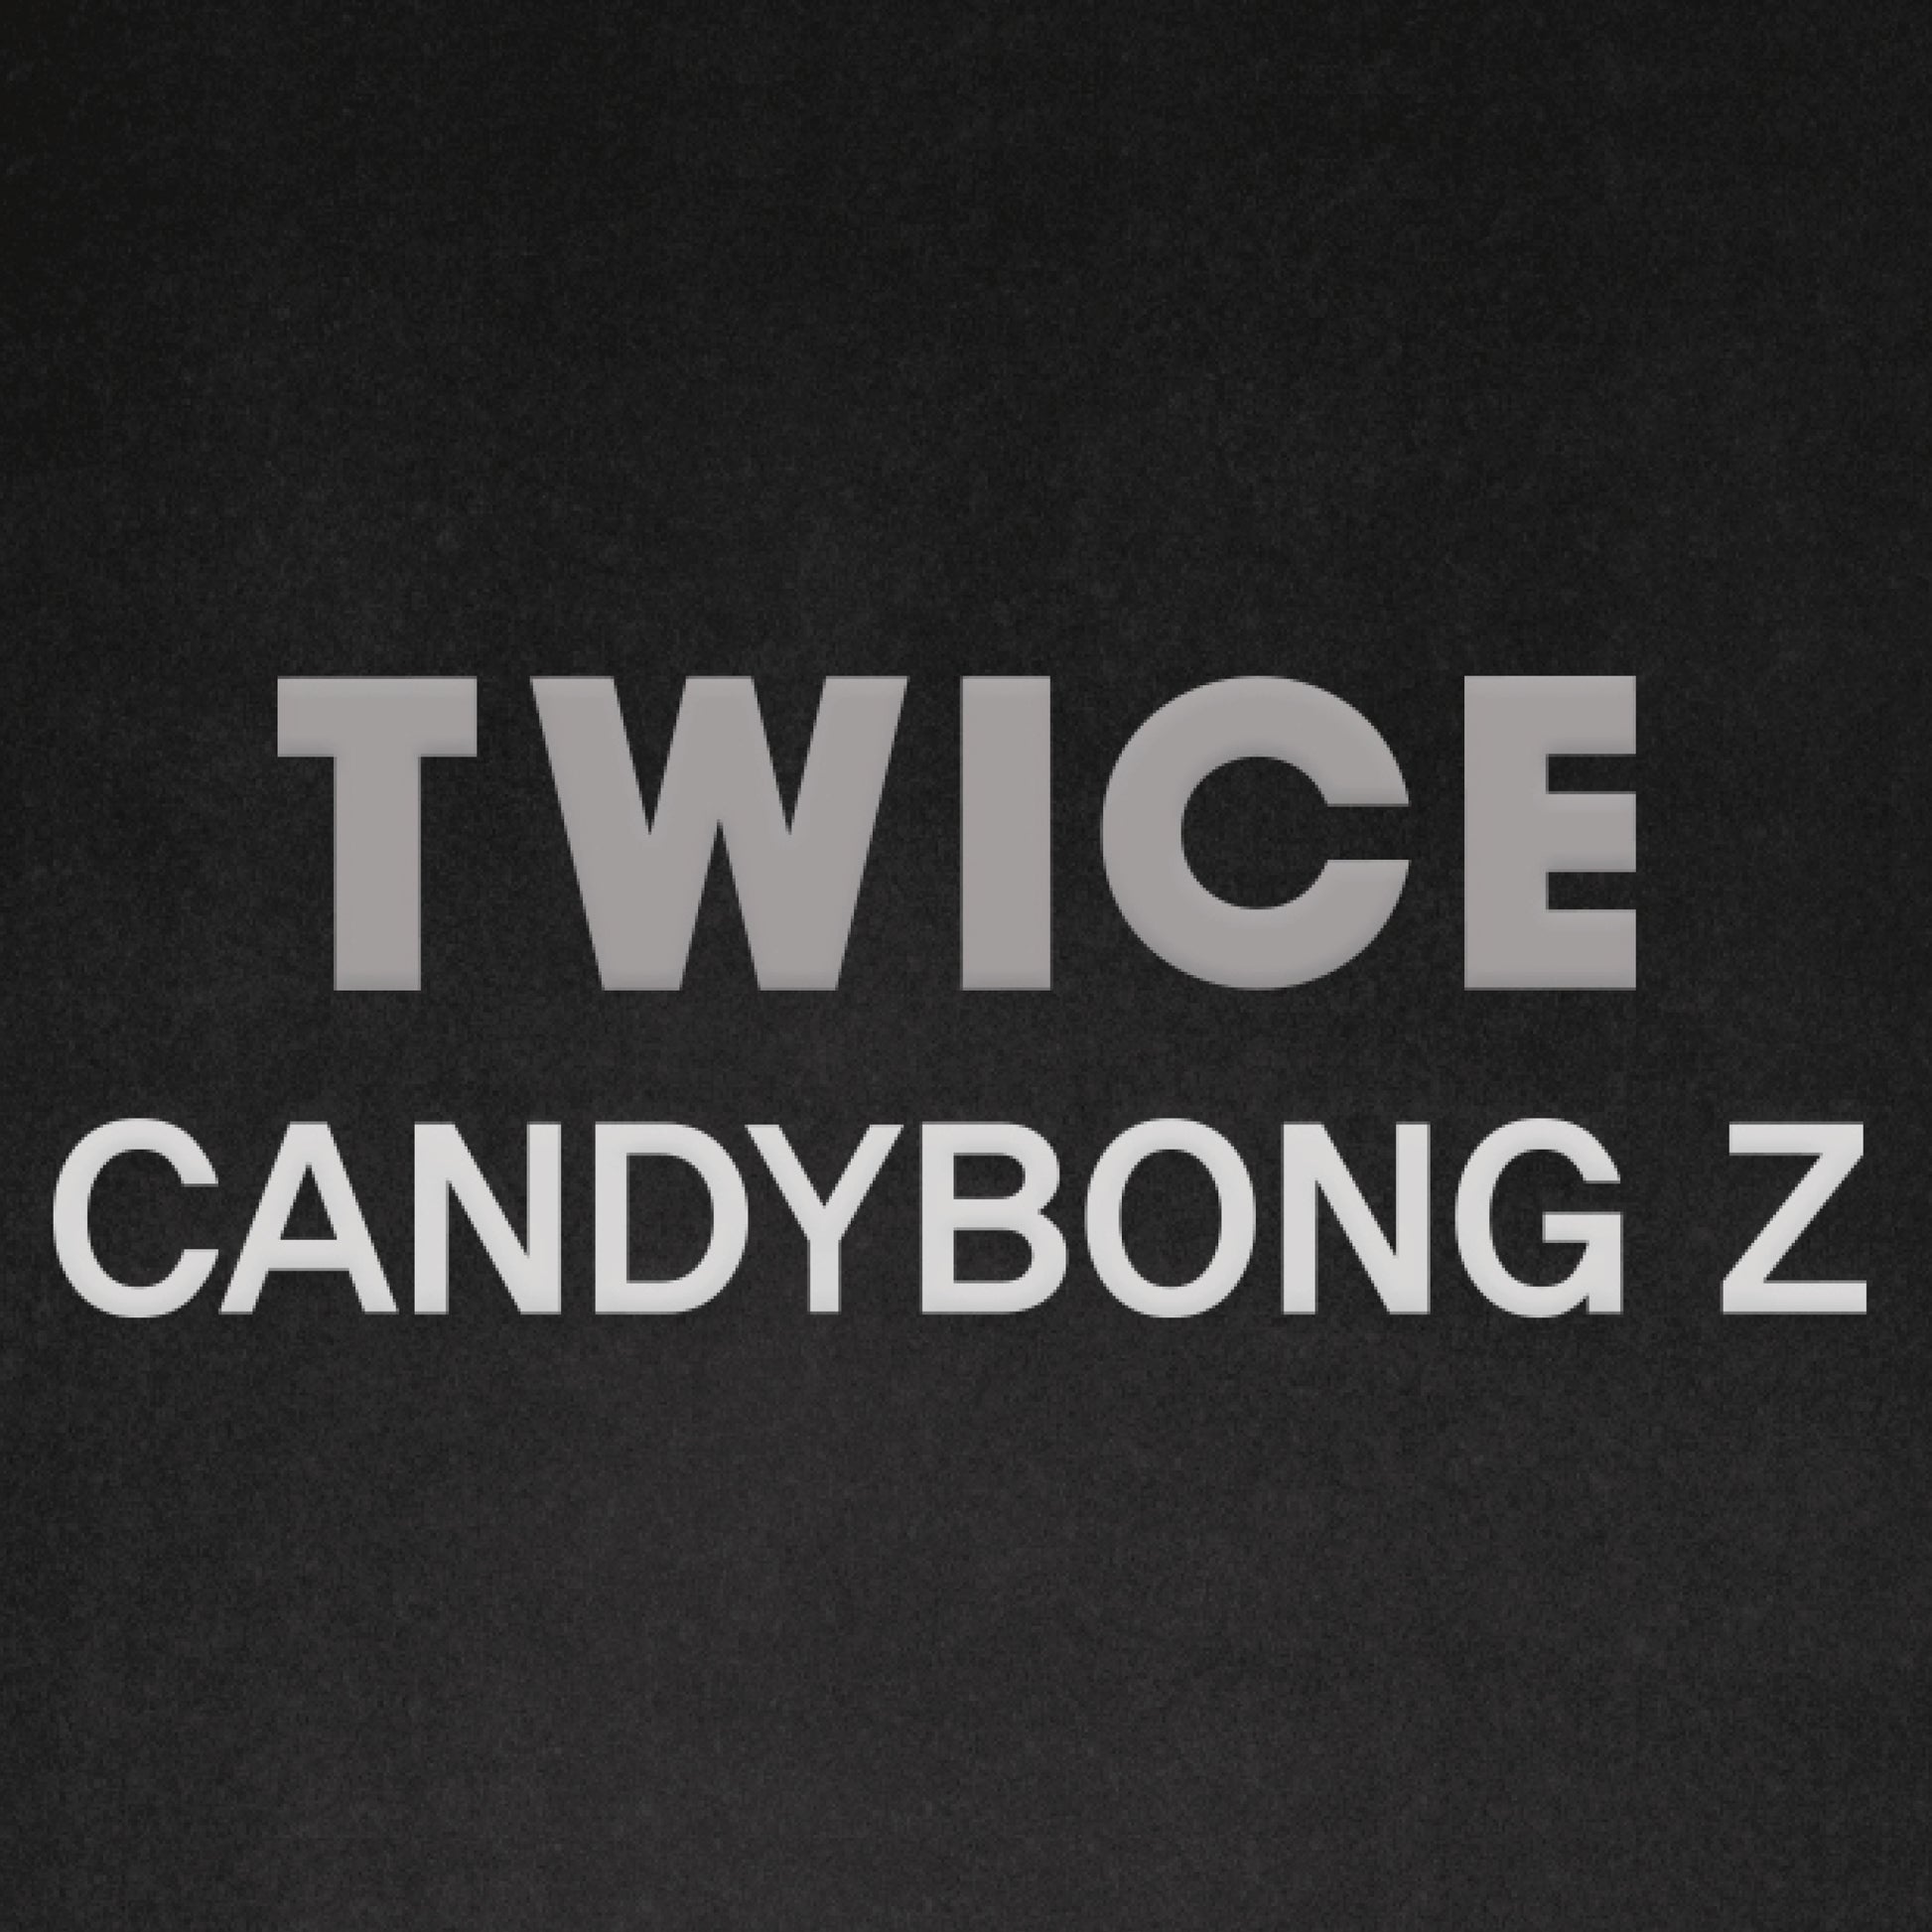 Unboxing: TWICE CANDYBONG ∞ OFFICIAL LIGHT STICK 